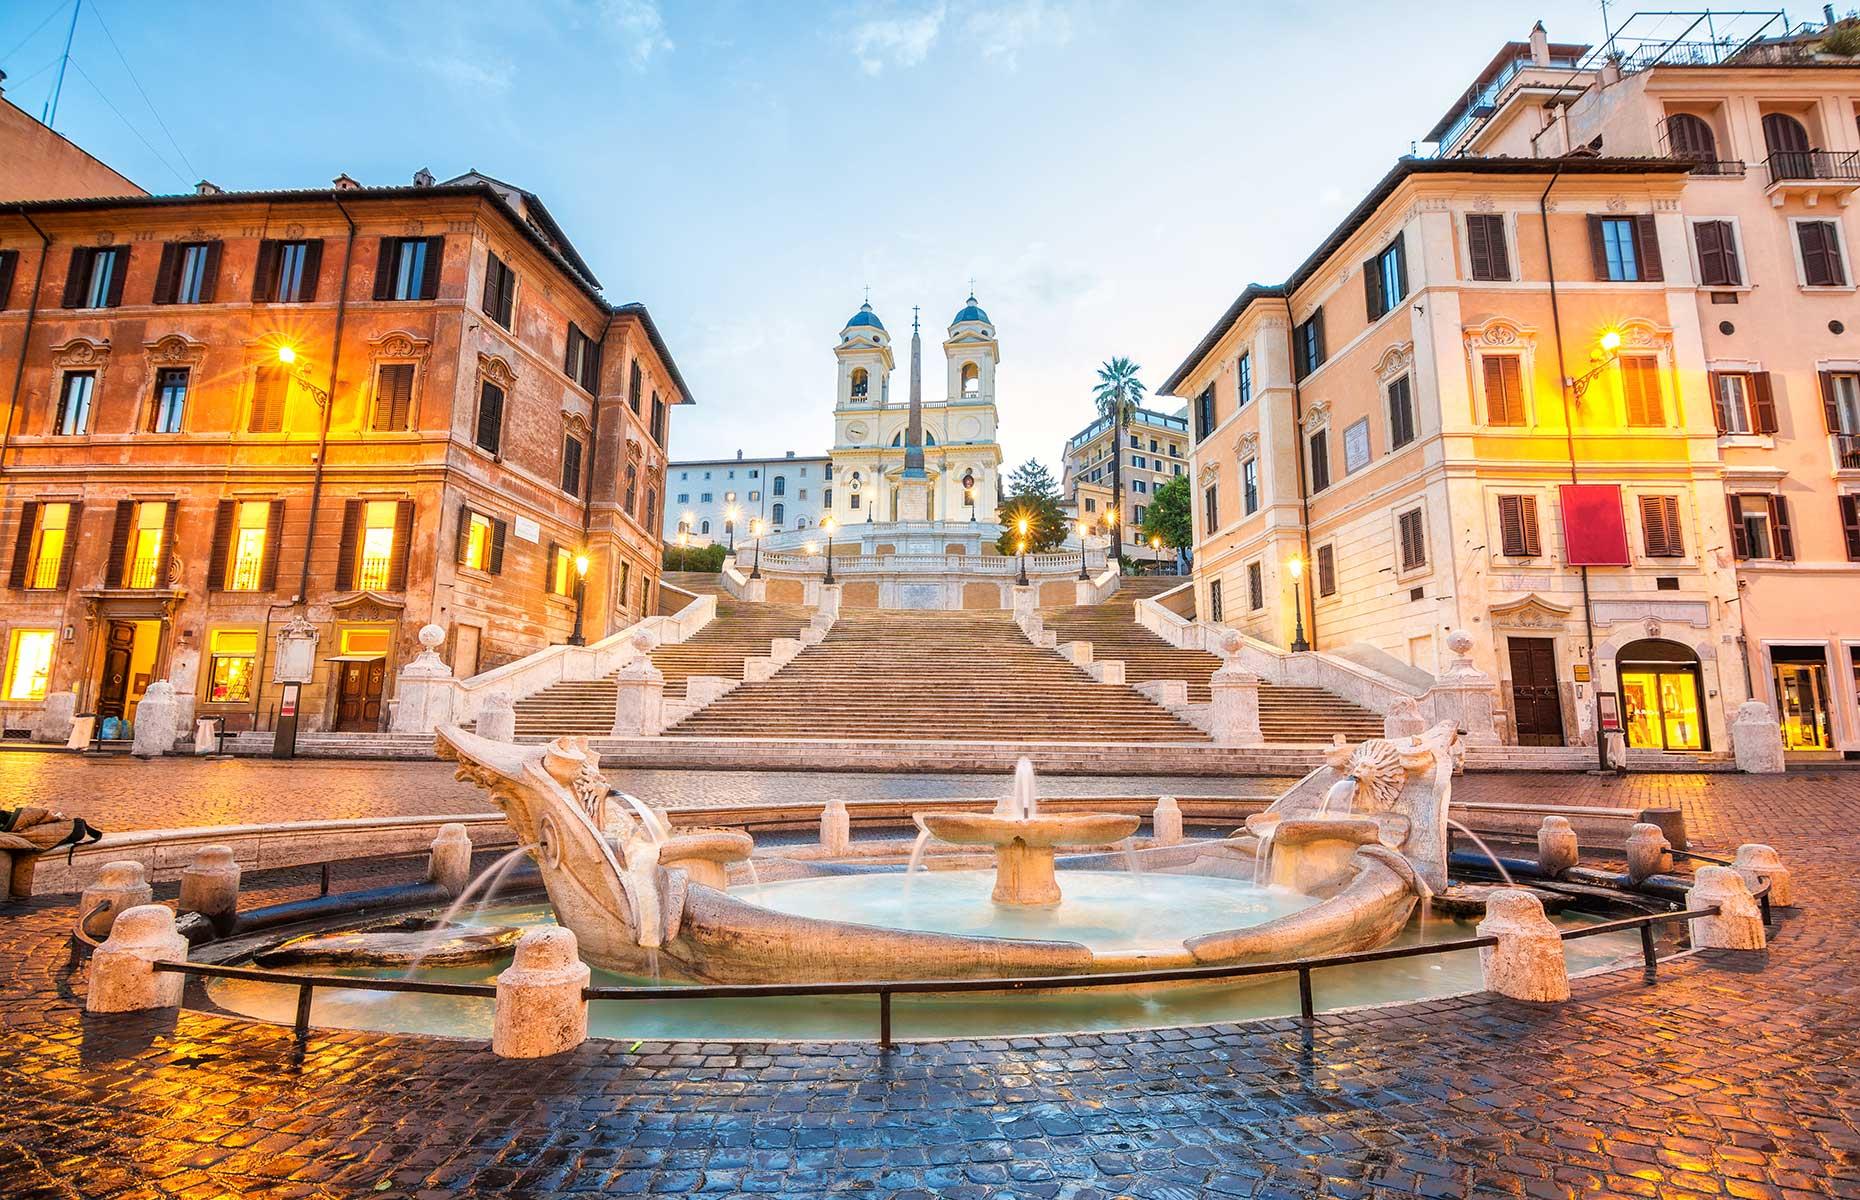 <p>Two American tourists were fined and briefly banned from Rome after <a href="https://www.theguardian.com/world/2022/jun/08/us-tourist-scooter-damage-rome-spanish-steps">chucking their electric scooters down the Spanish Steps</a> which, unsurprisingly, caused minor damage; they were caught by surveillance cameras and briefly banned from Rome. Then, a Saudi tourist <a href="https://edition.cnn.com/travel/article/maserati-spanish-steps-italy/index.html">drove his rented Maserati down</a> the first flight of steps, fracturing the 16th and 29th steps of the right-hand flight. He was charged with aggravated damage to cultural heritage and monuments. </p>